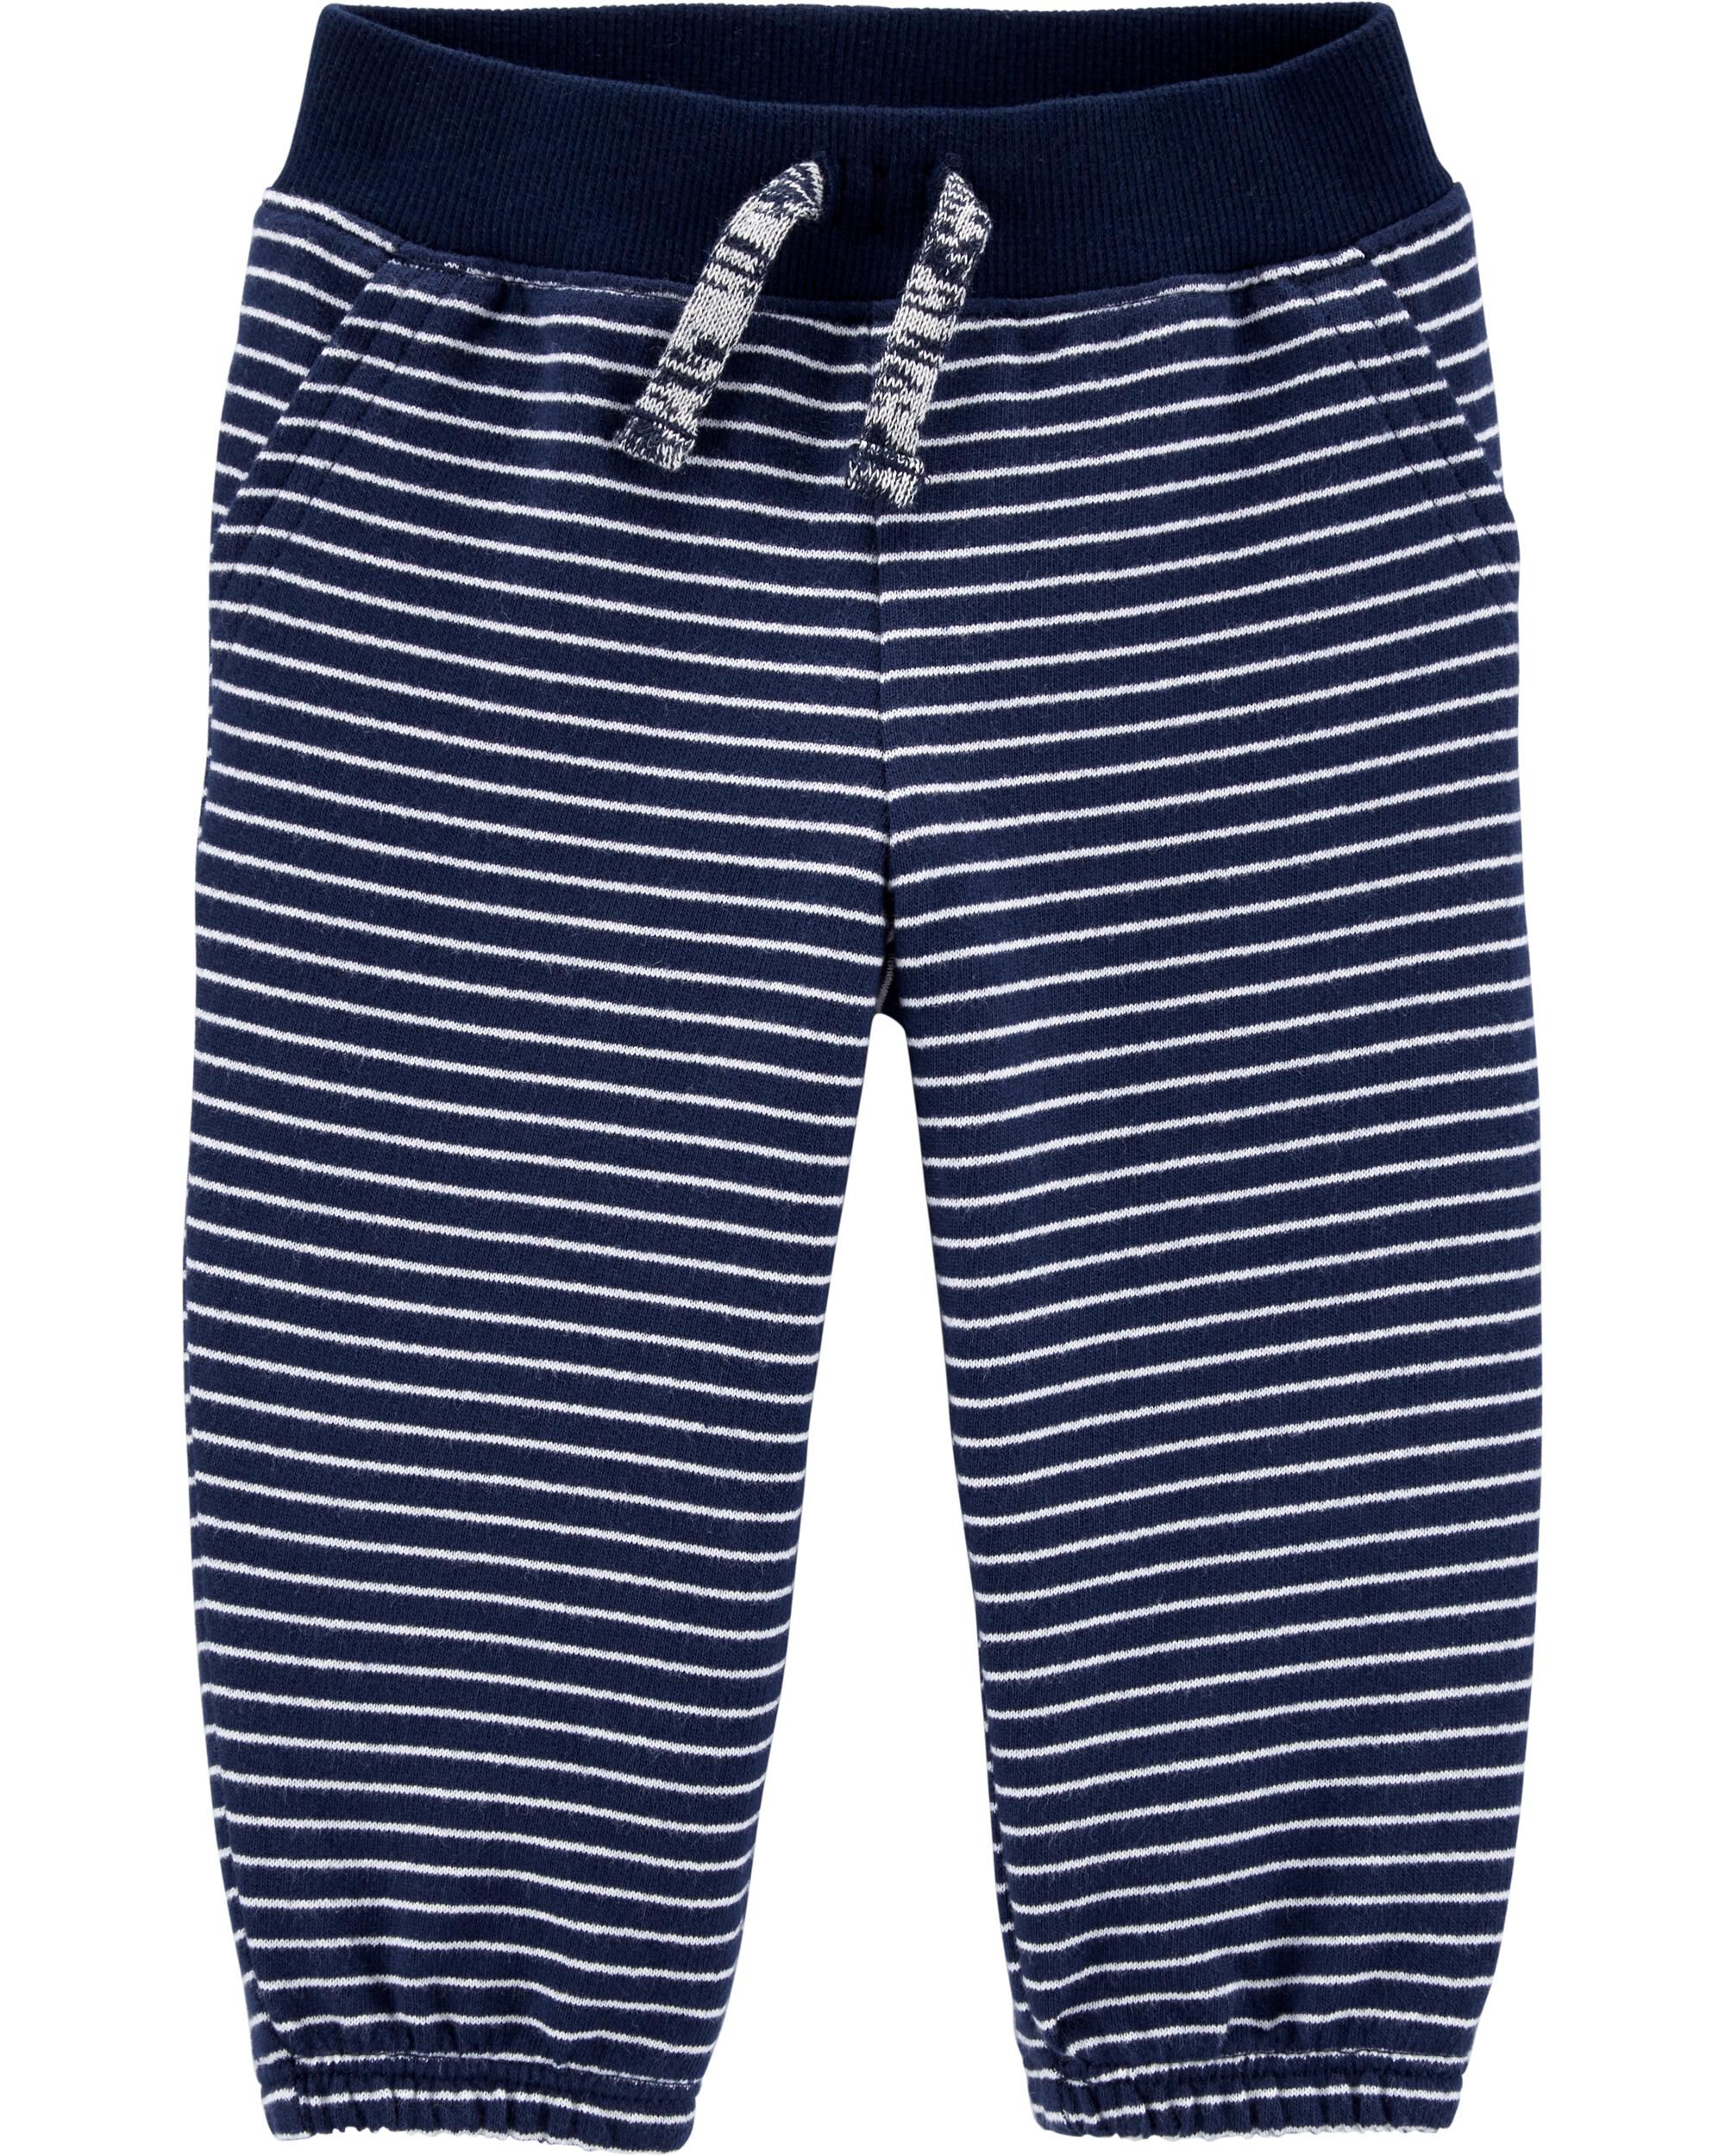  *DOORBUSTER* Striped Pull-On French Terry Pants 